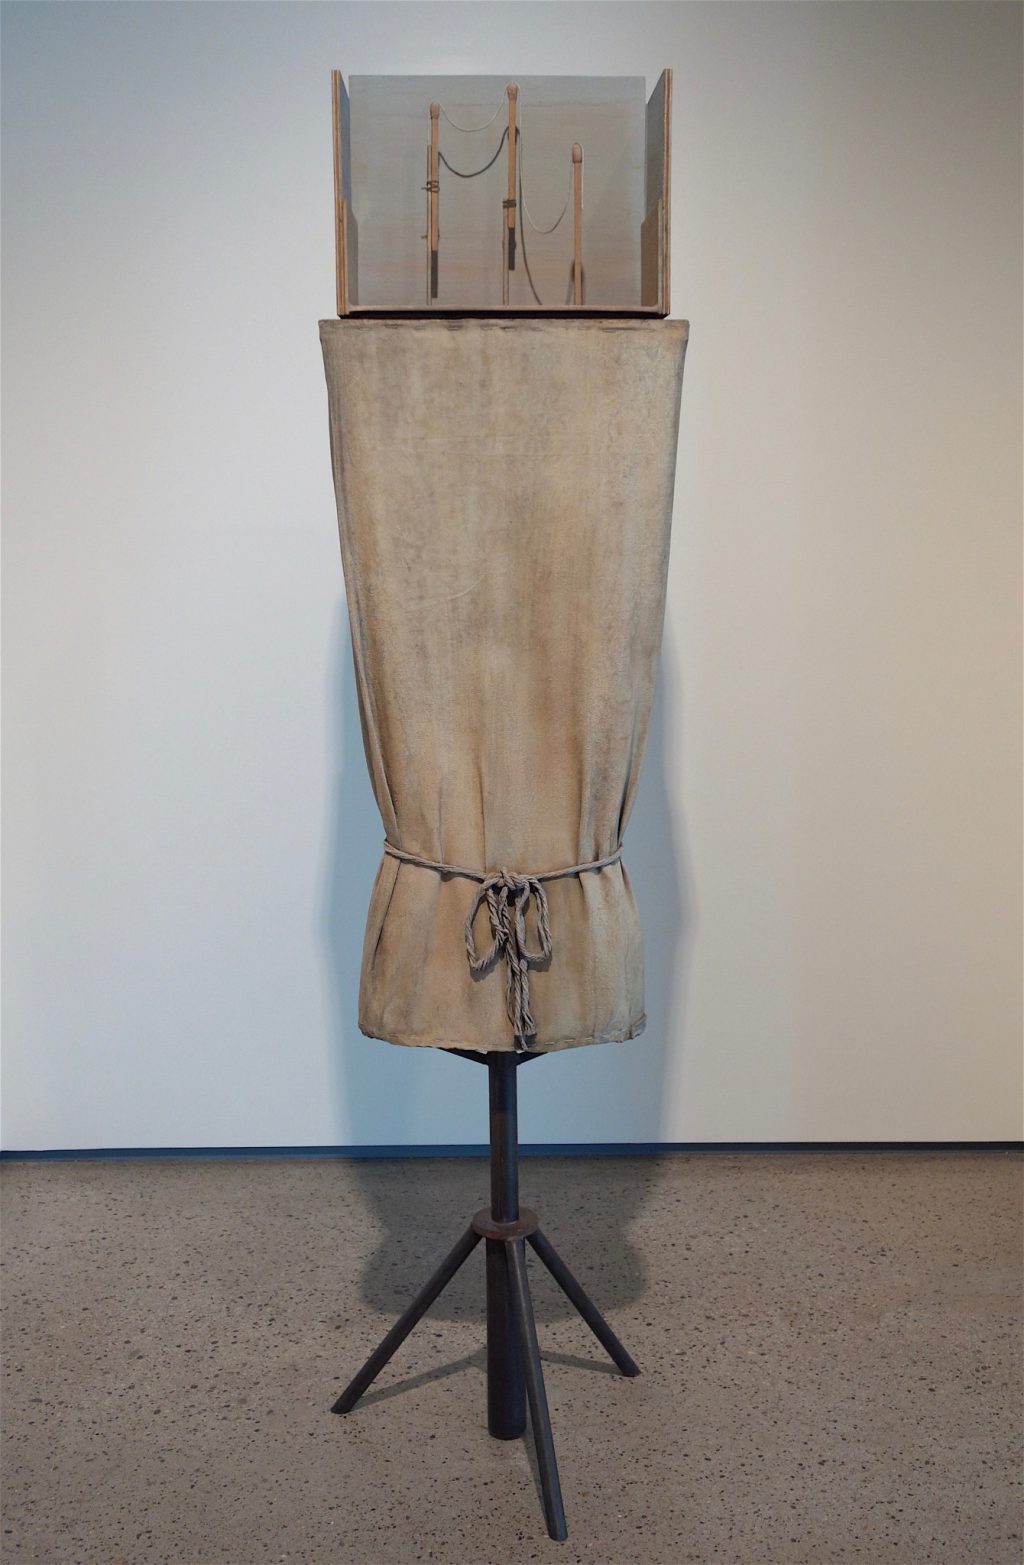 Mark Manders “Figure Study” 1997-2015, patinated and painted bronze